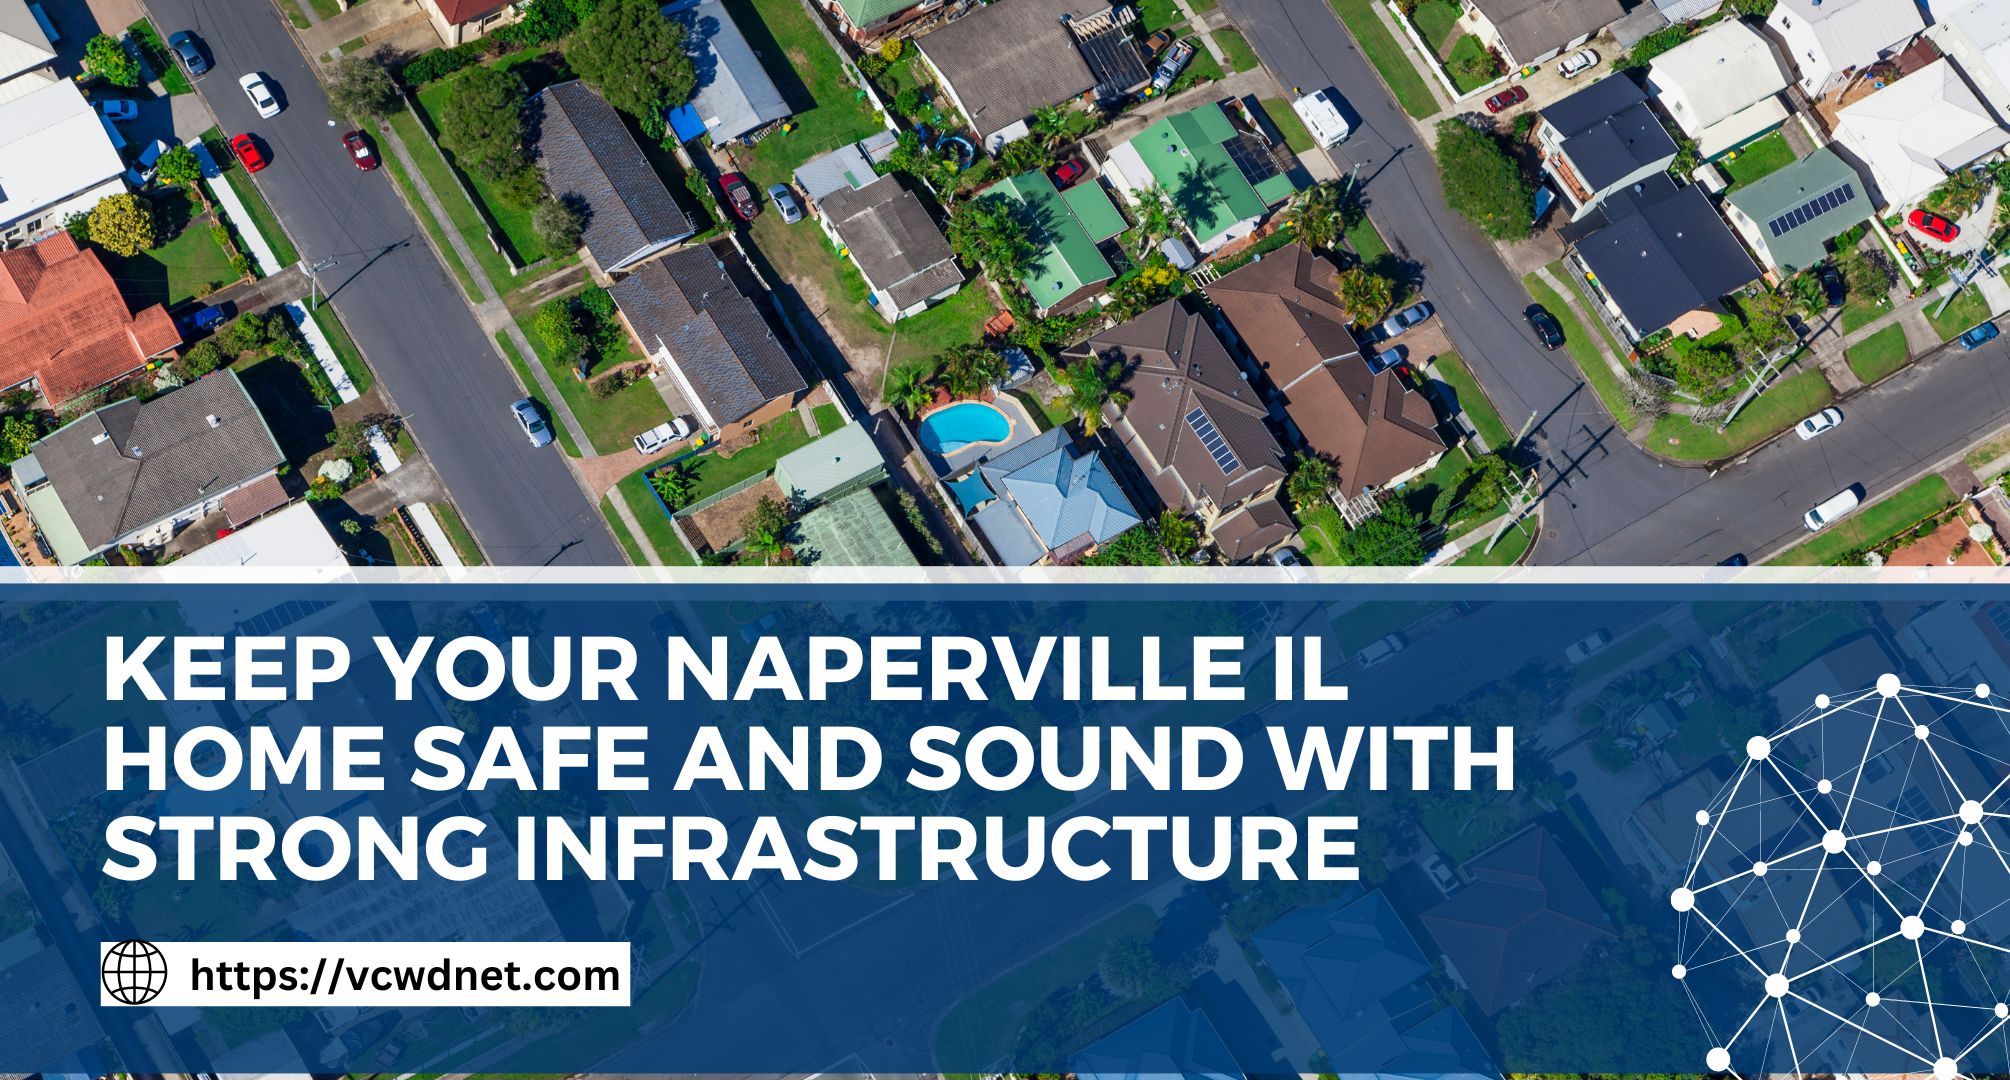 Keep Your Naperville Home Safe and Sound with Strong Infrastructure